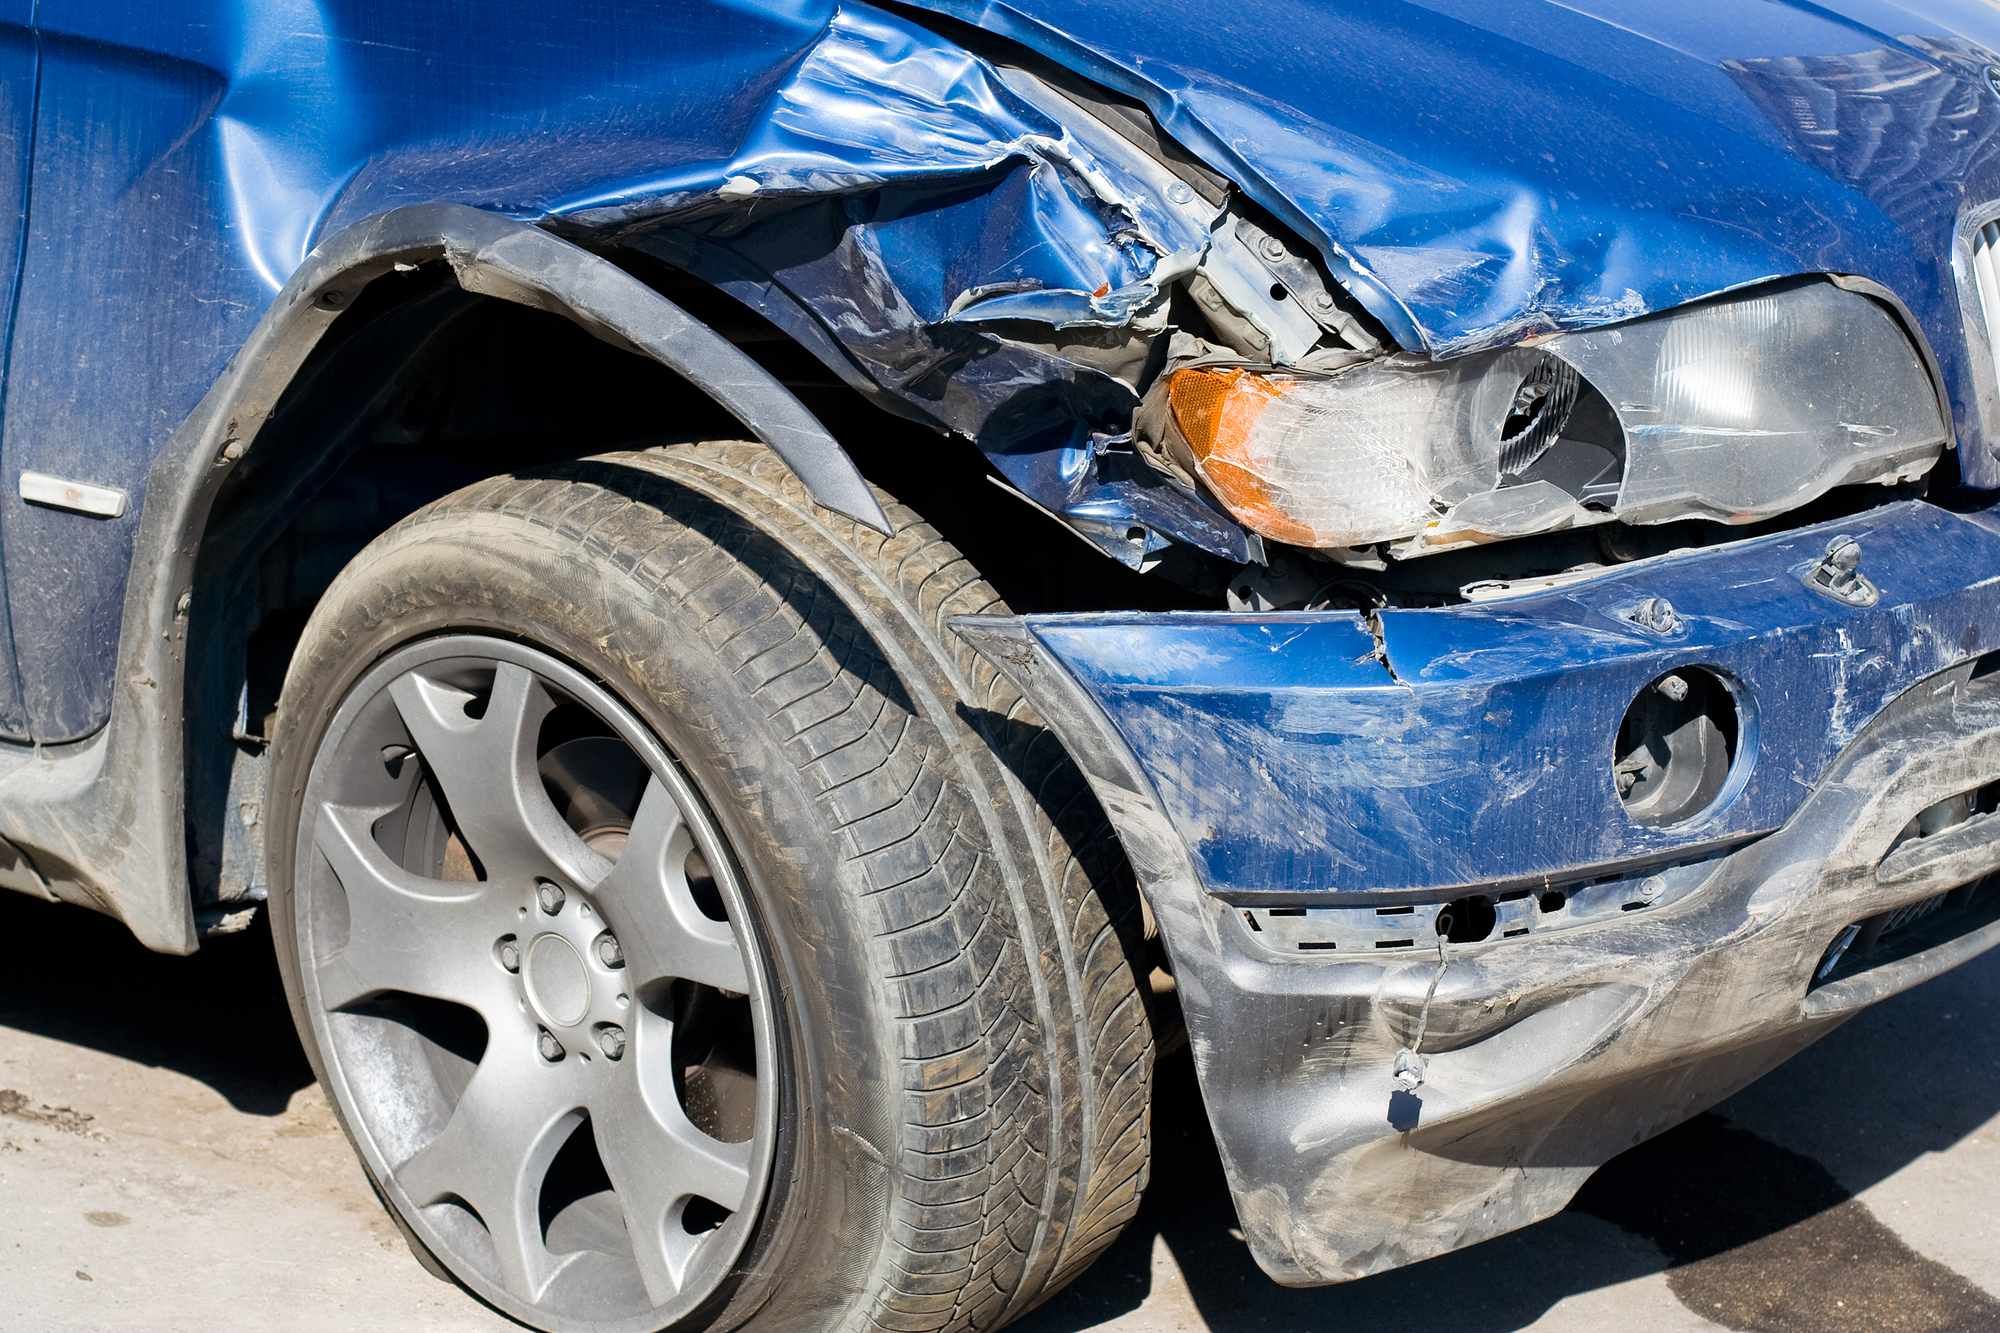 Totaled Car Meaning & What Happens If You Total a Leased Car in